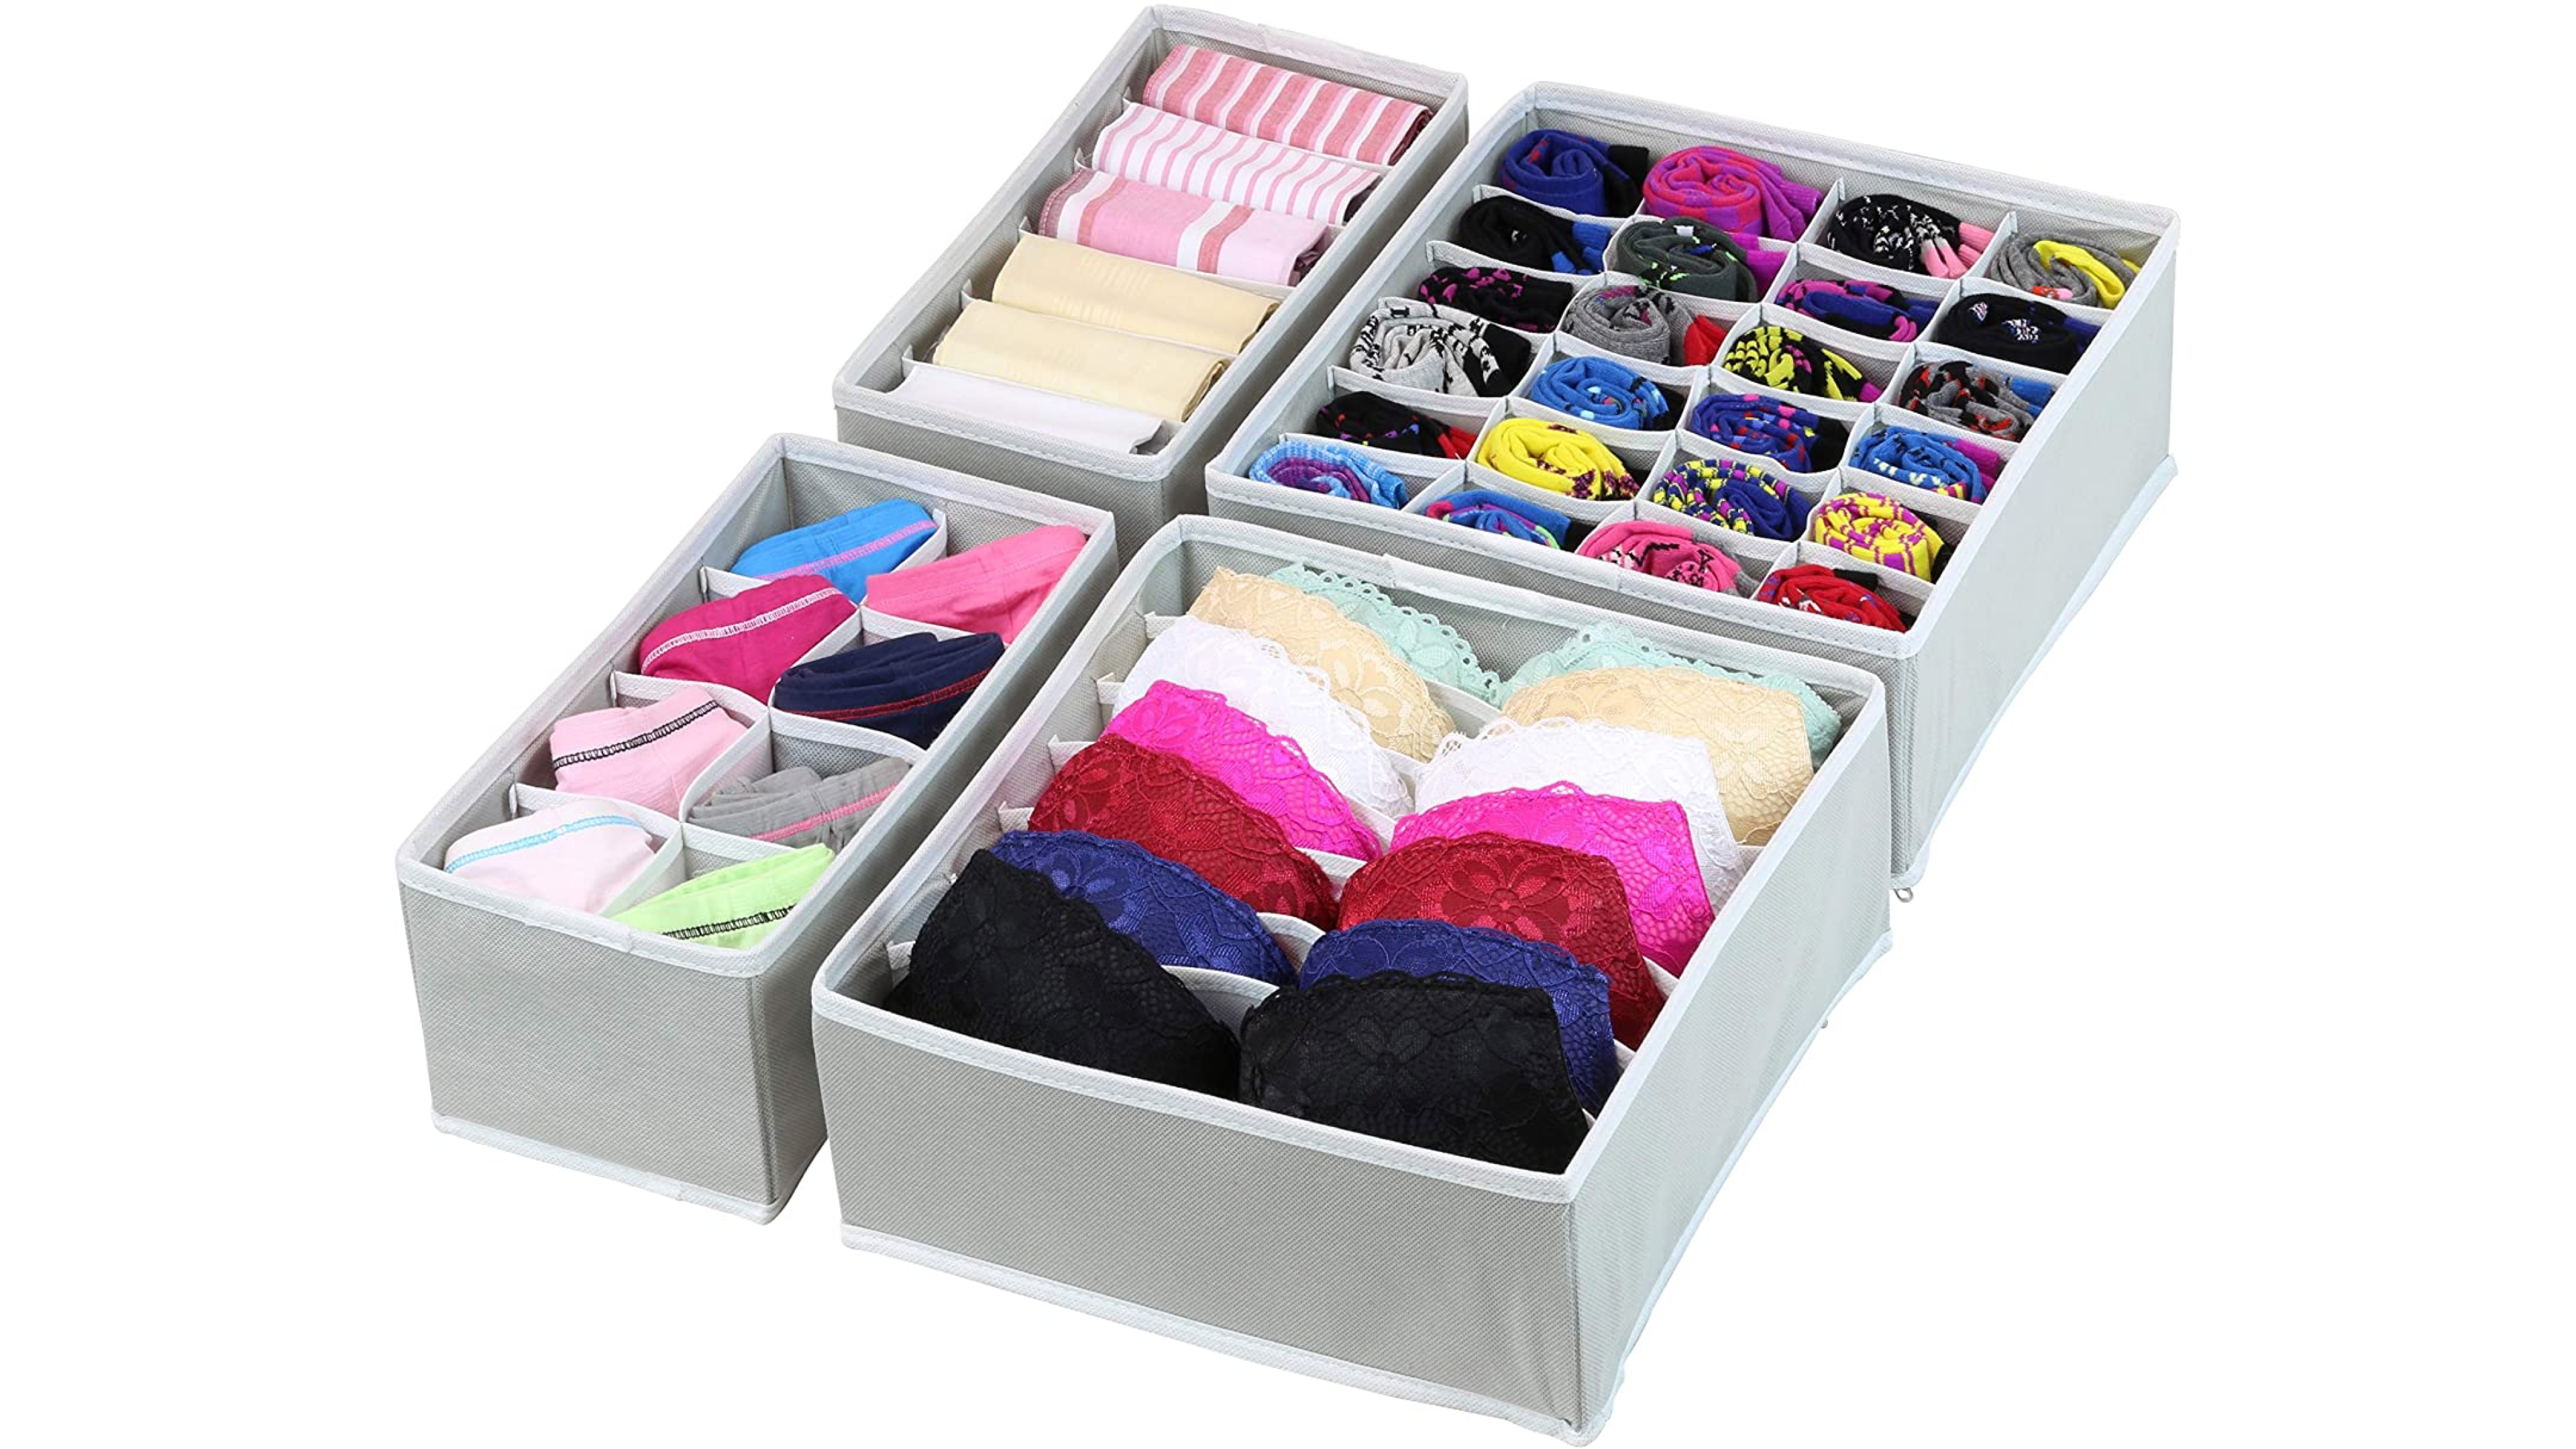 drawer inserts that can help organize clothes into separate compartments so things are neatly folded